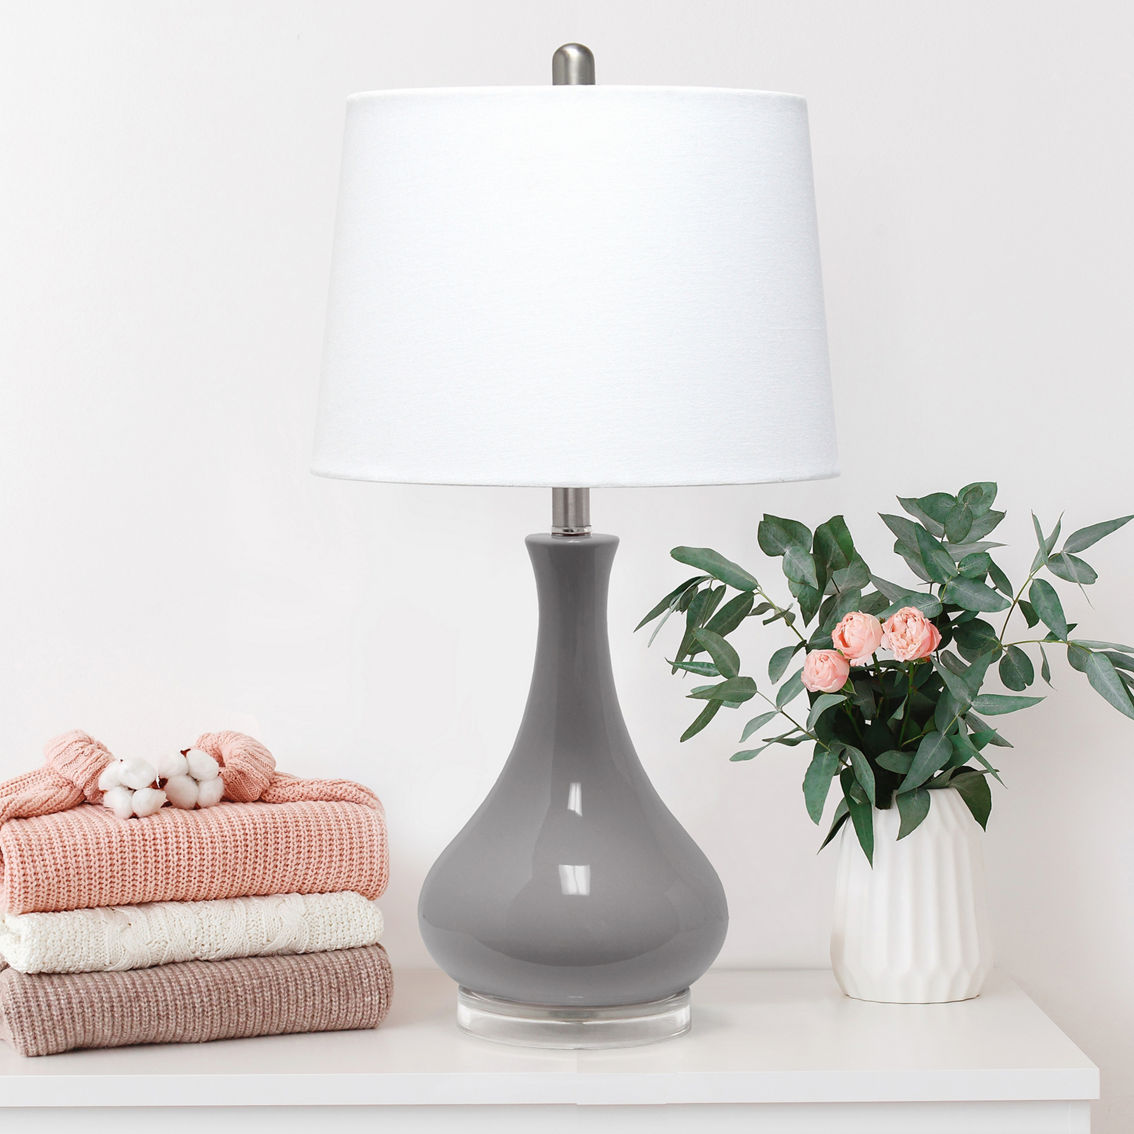 Lalia Home Droplet Table Lamp with Fabric Shade - Image 4 of 8